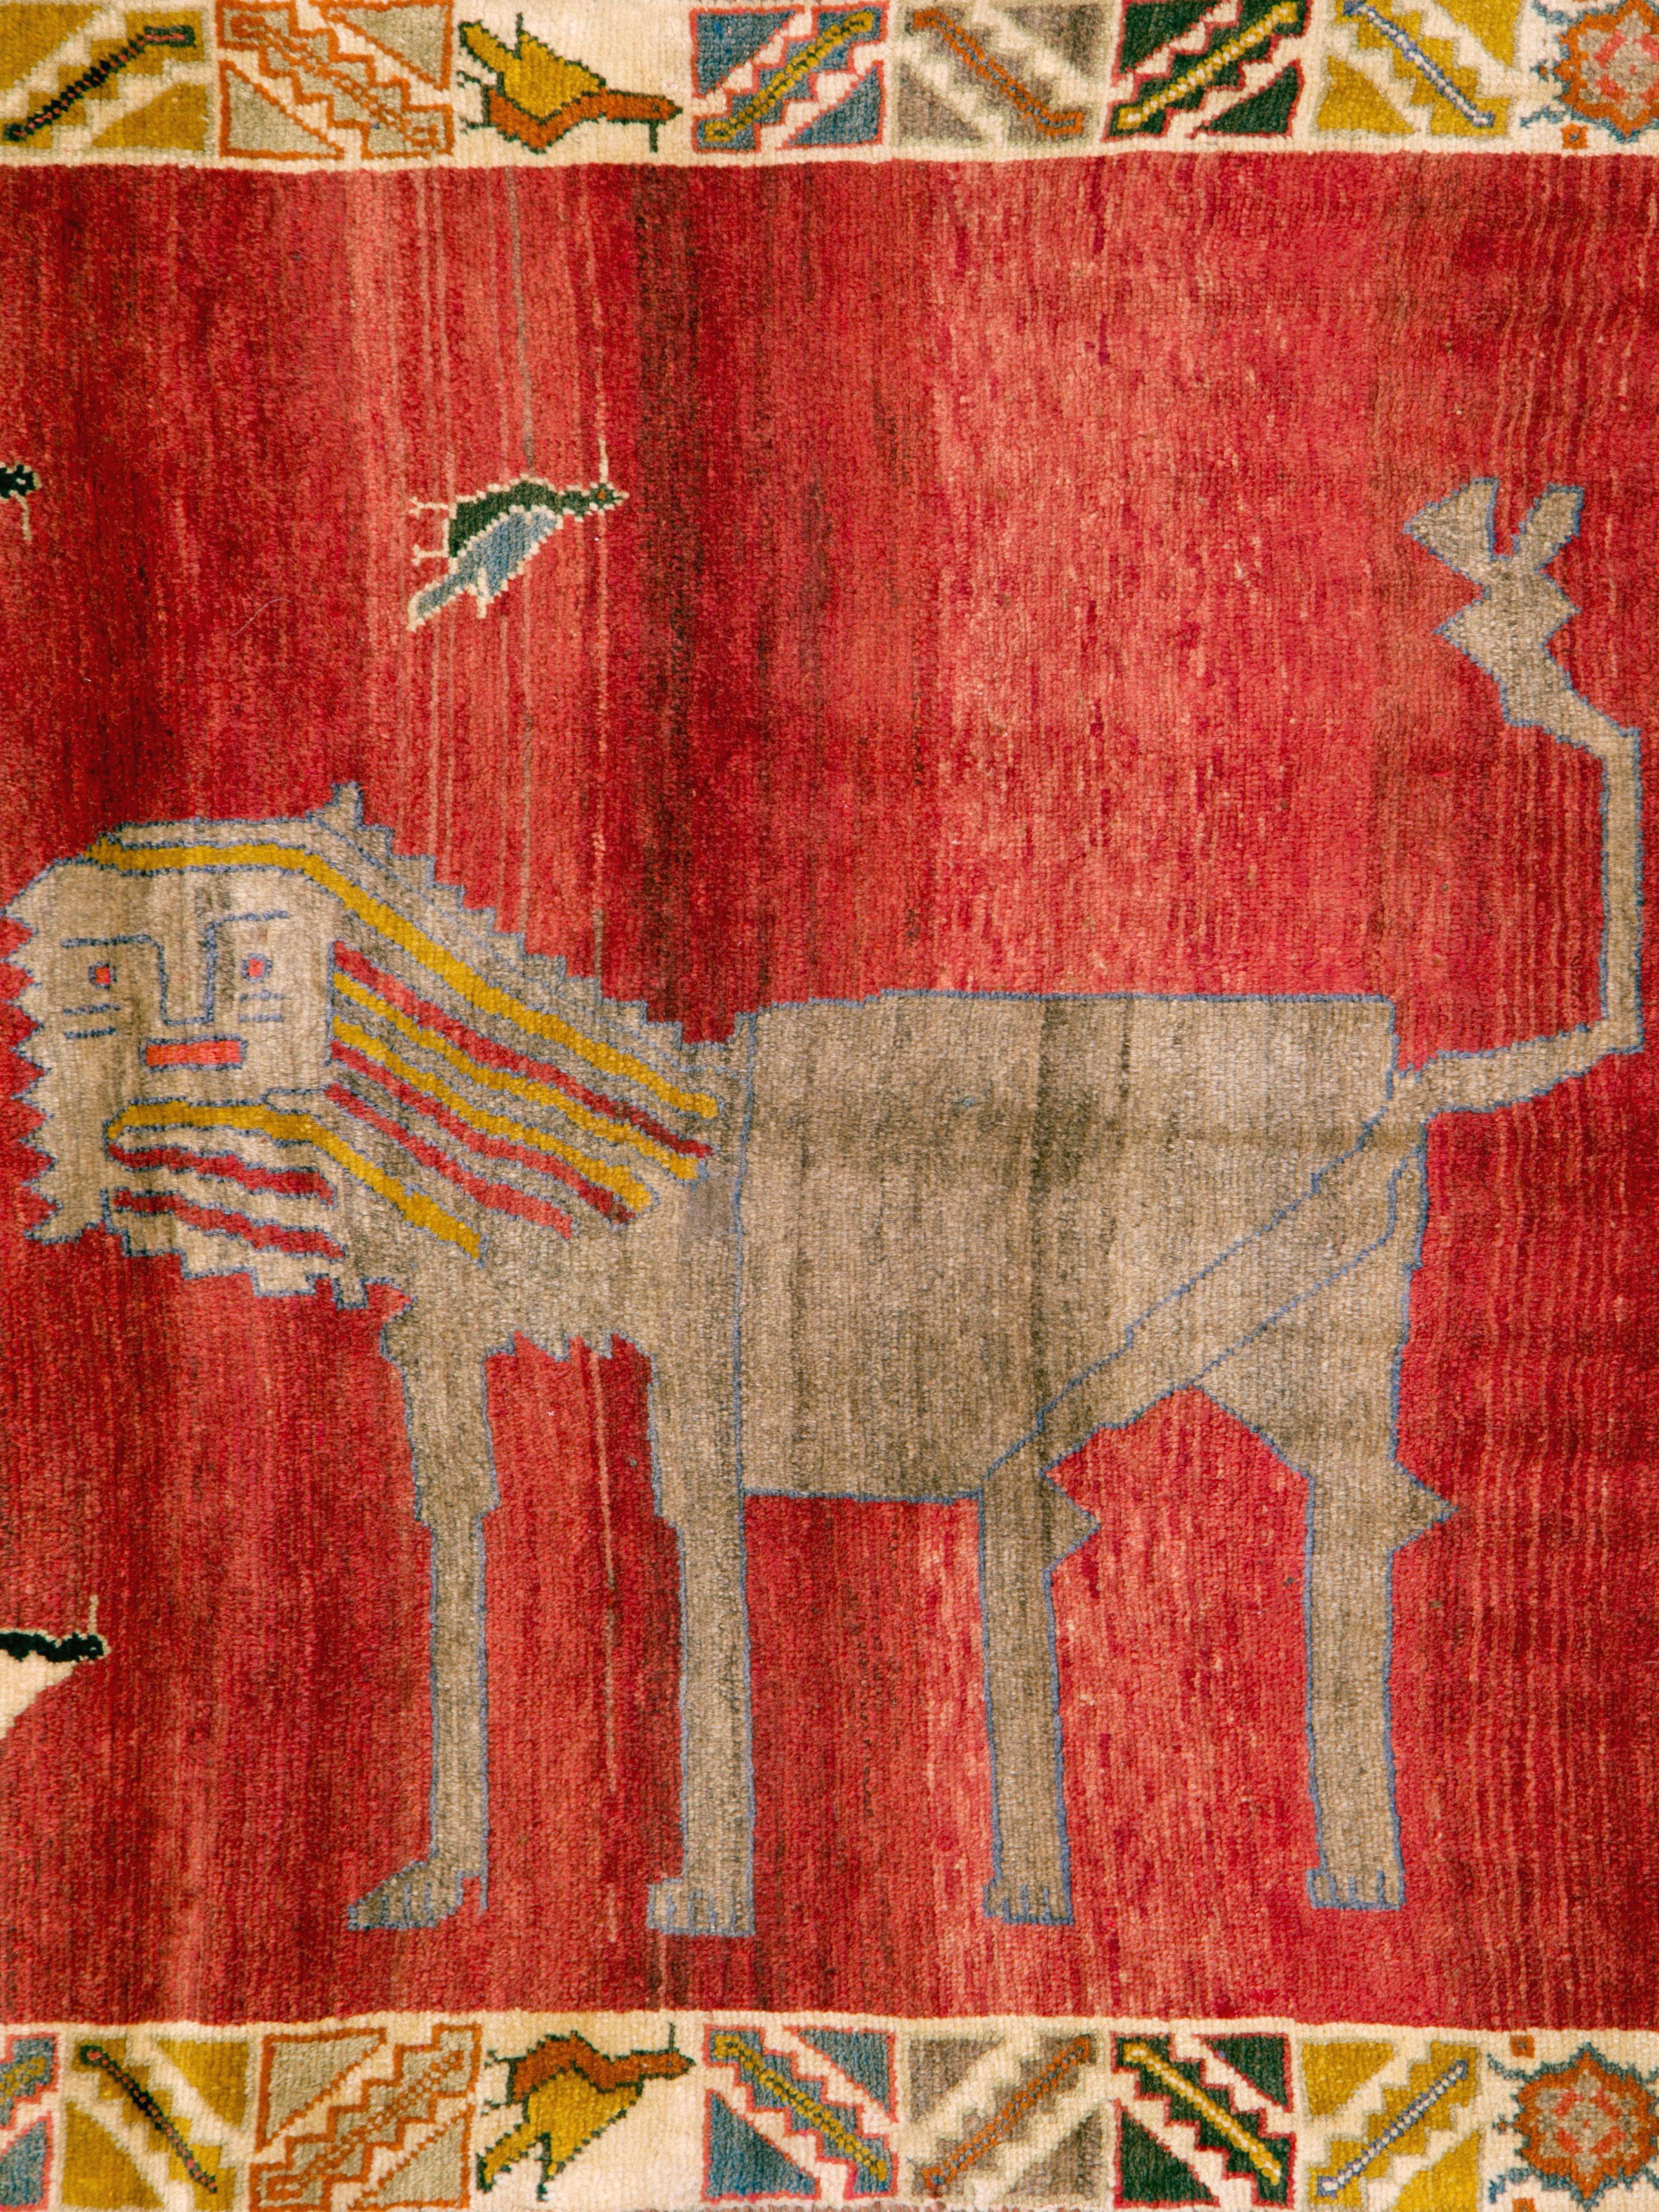 A vintage Persian Gabbeh rug with a pictorial design of 2, not so dangerous looking, lions. Woven during the mid-20th century, this rug has a very quirky, very fun, and definitely tribal appeal.